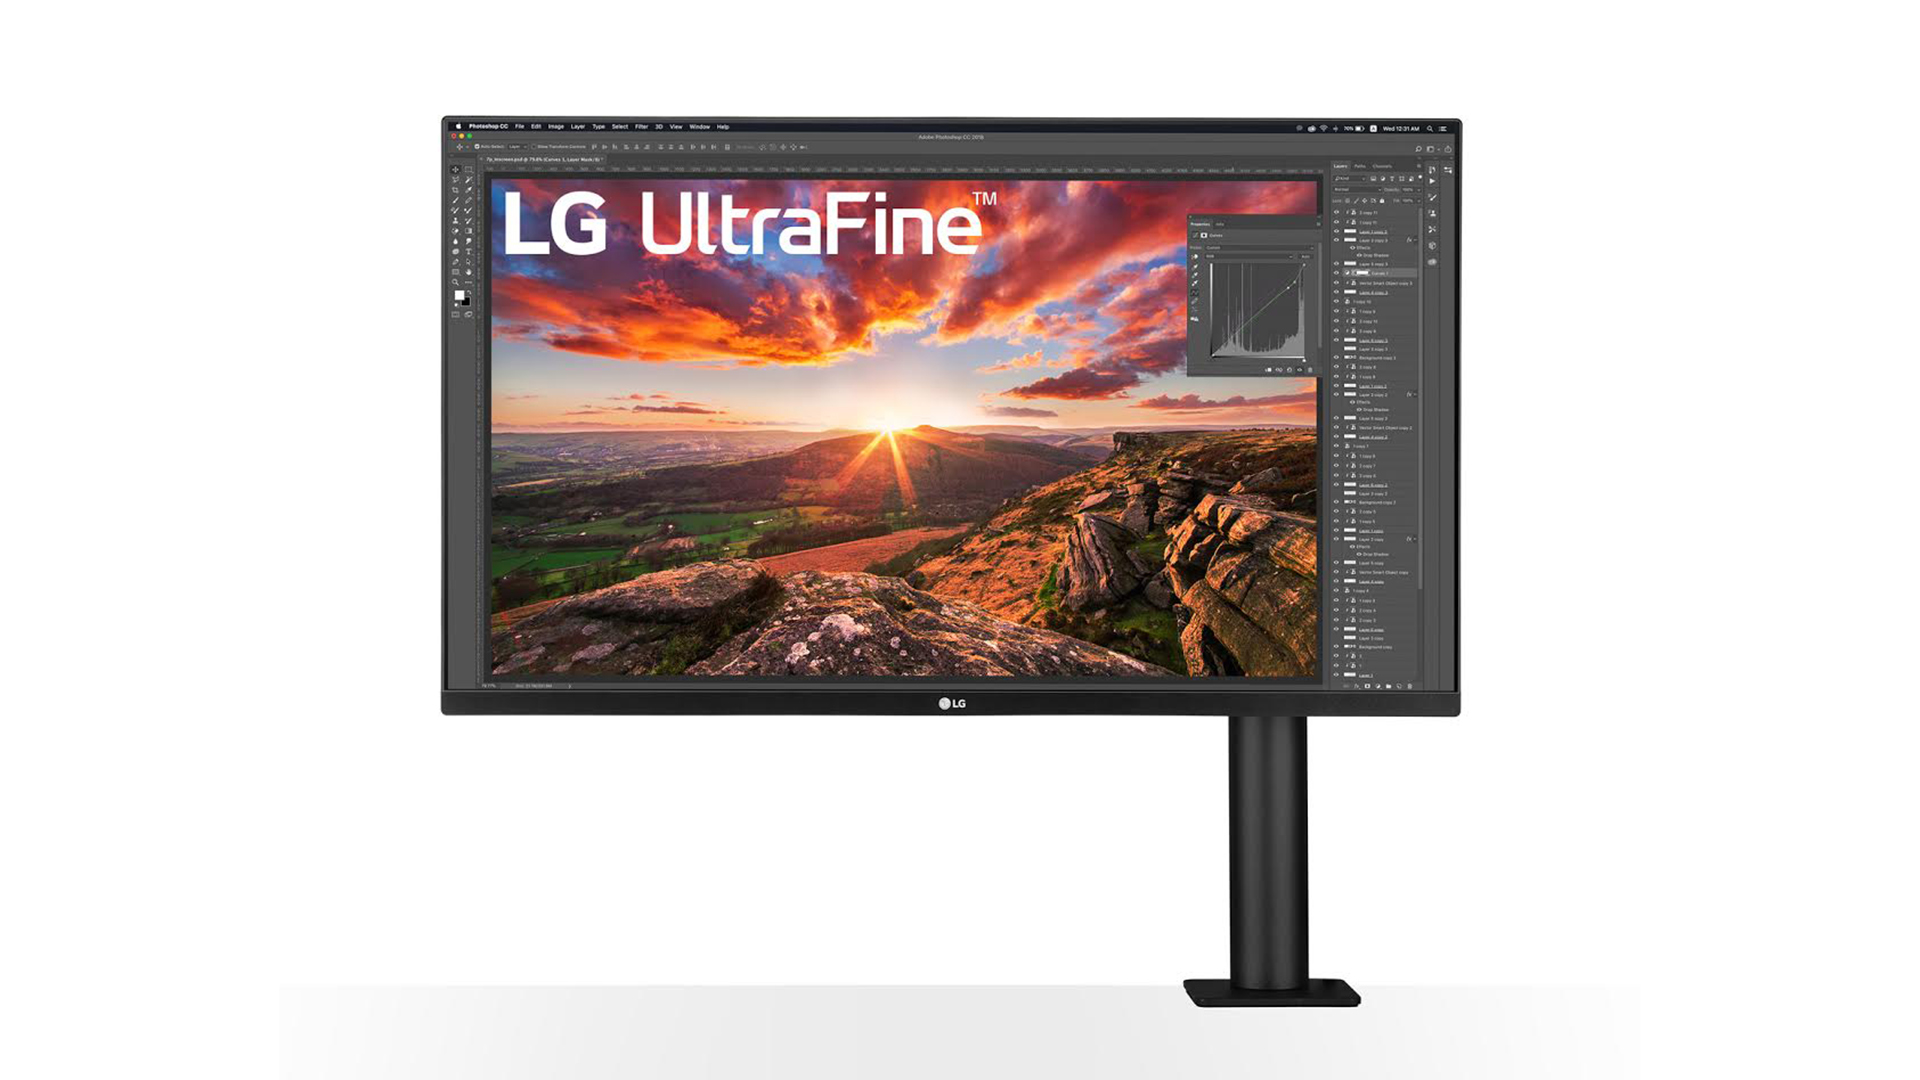 LG Ultrafine Display Ergo 4K monitors launched in India